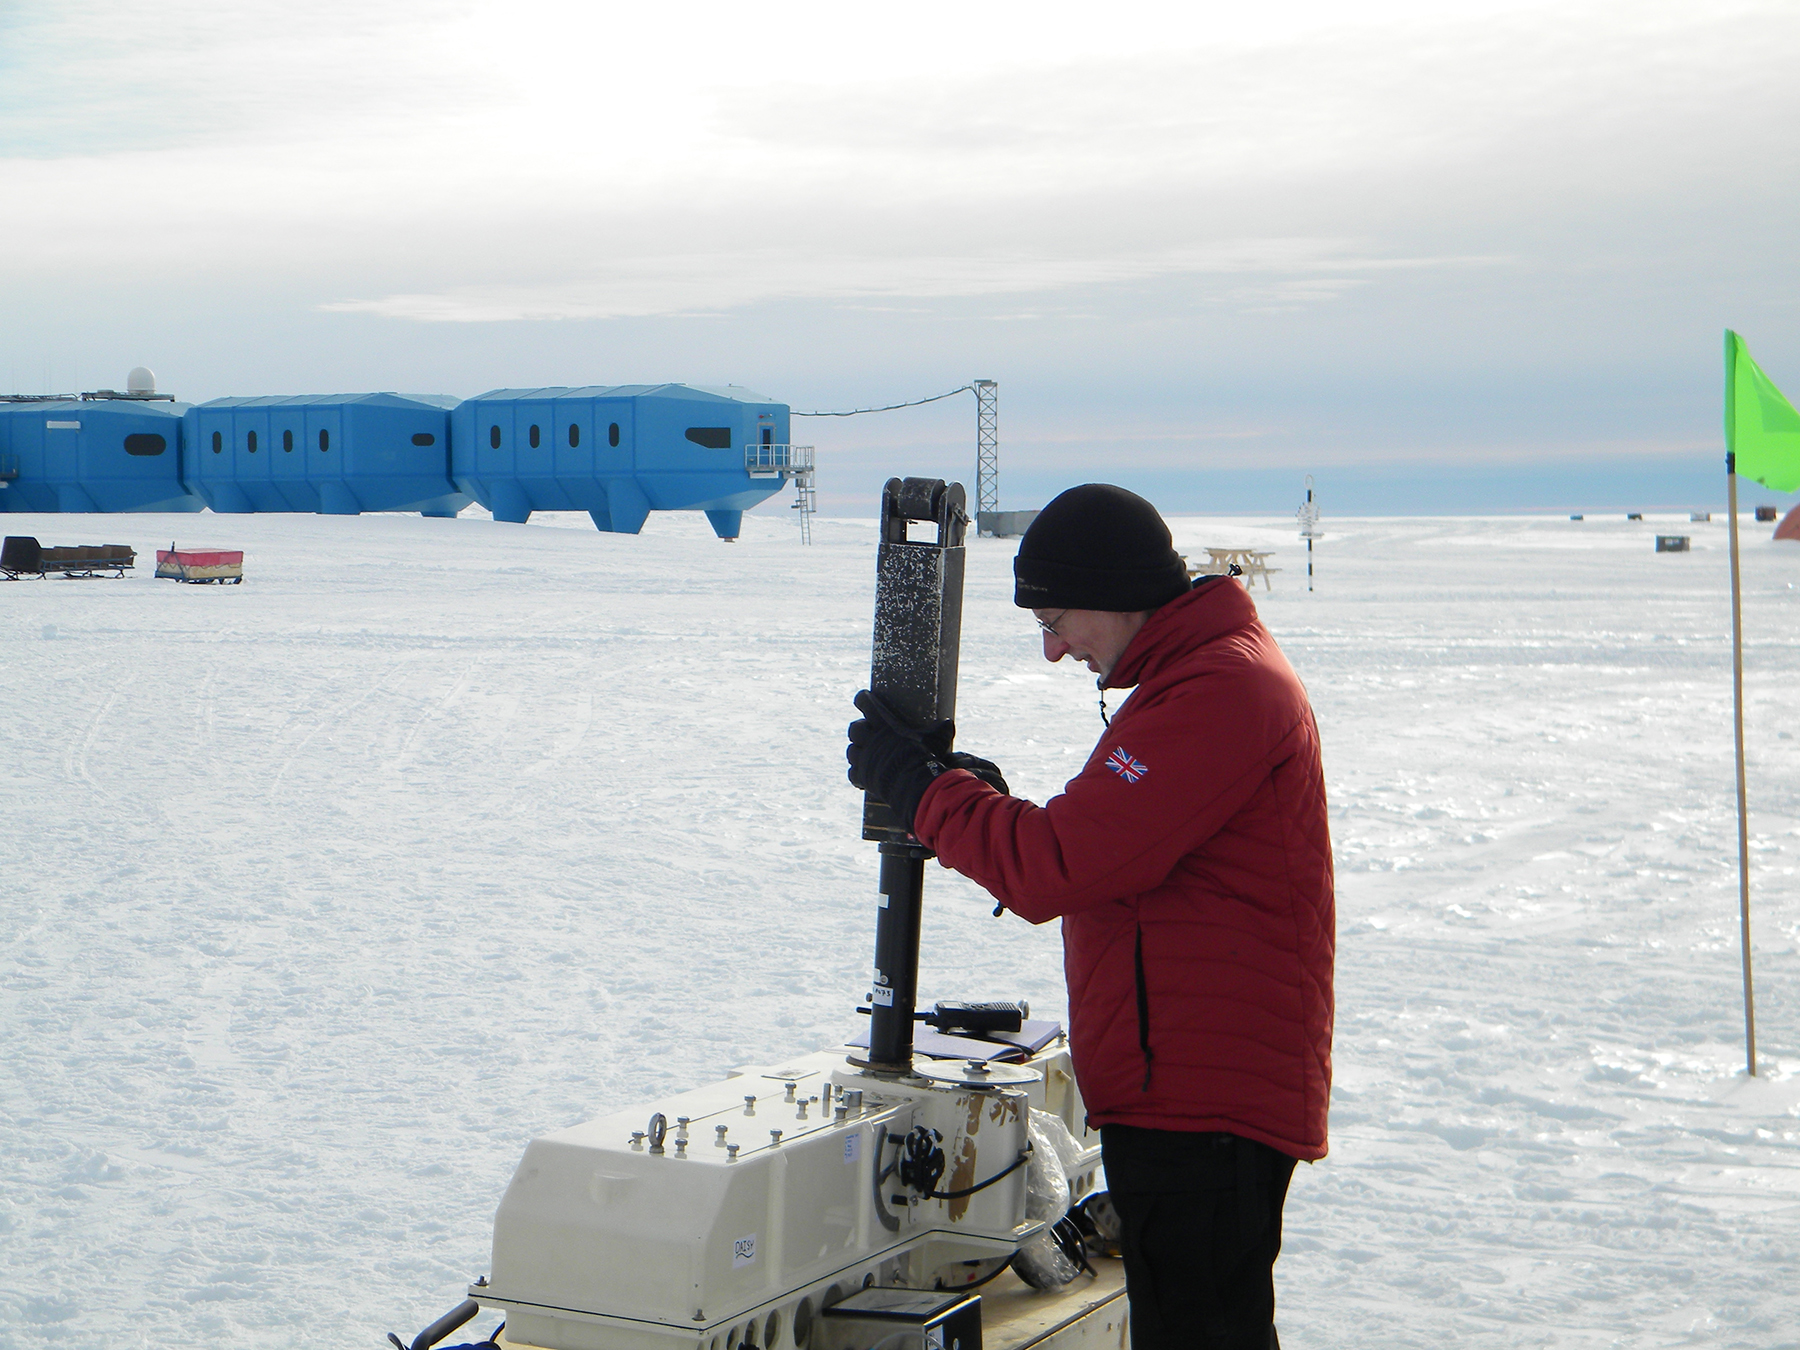 Using the Dobson ozone spectrophotometer, with Halley station in the background.